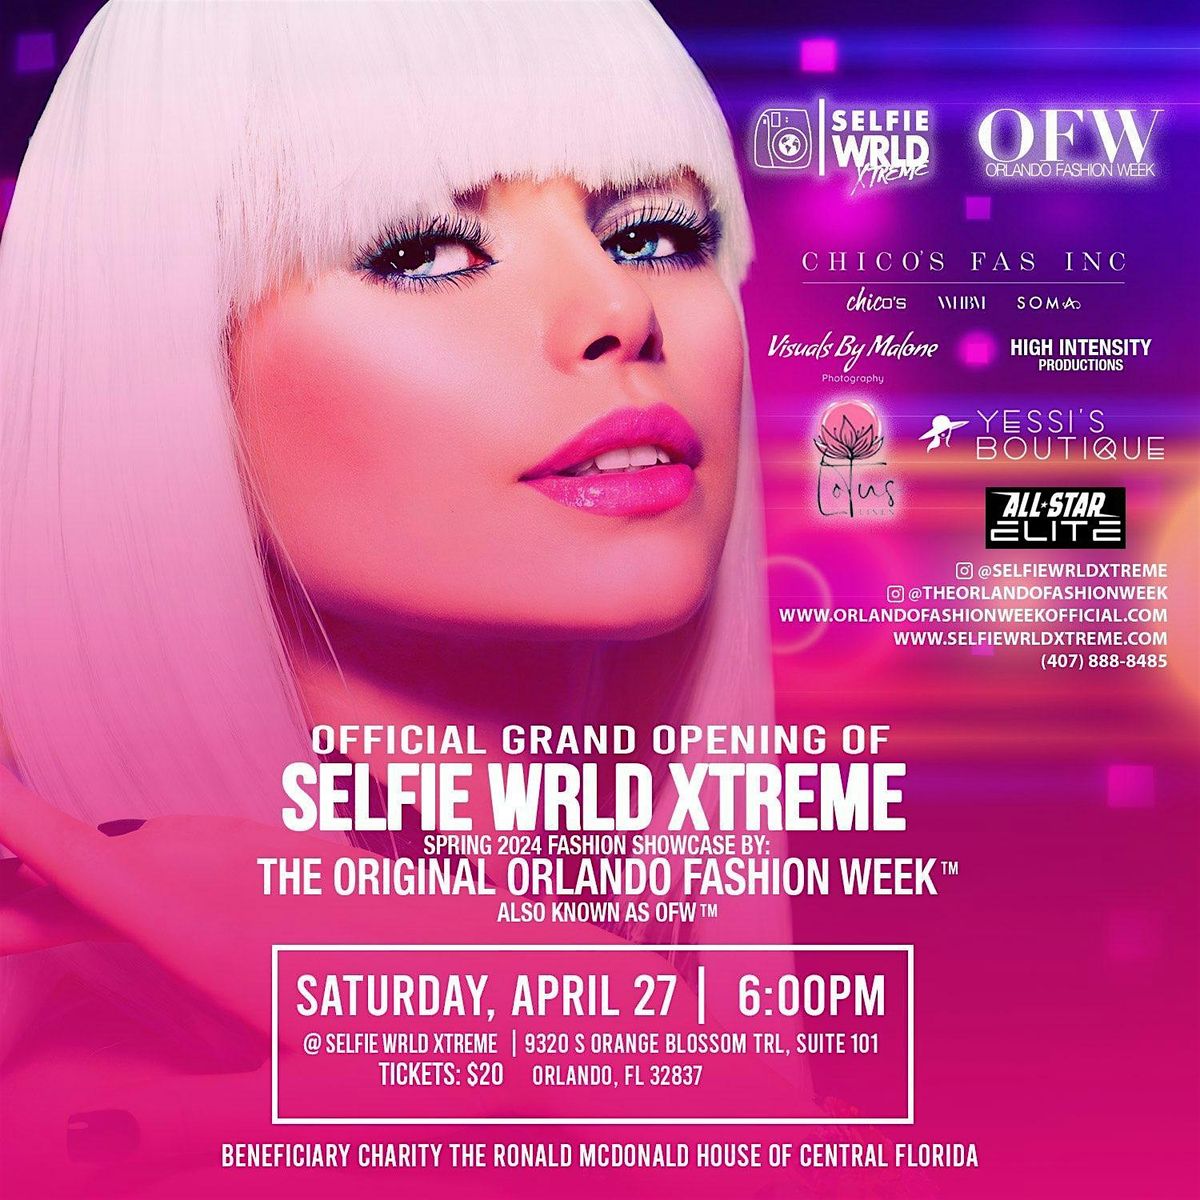 Selfie WRLD Xtreme Official Grand Opening featuring Orlando Fashion Week